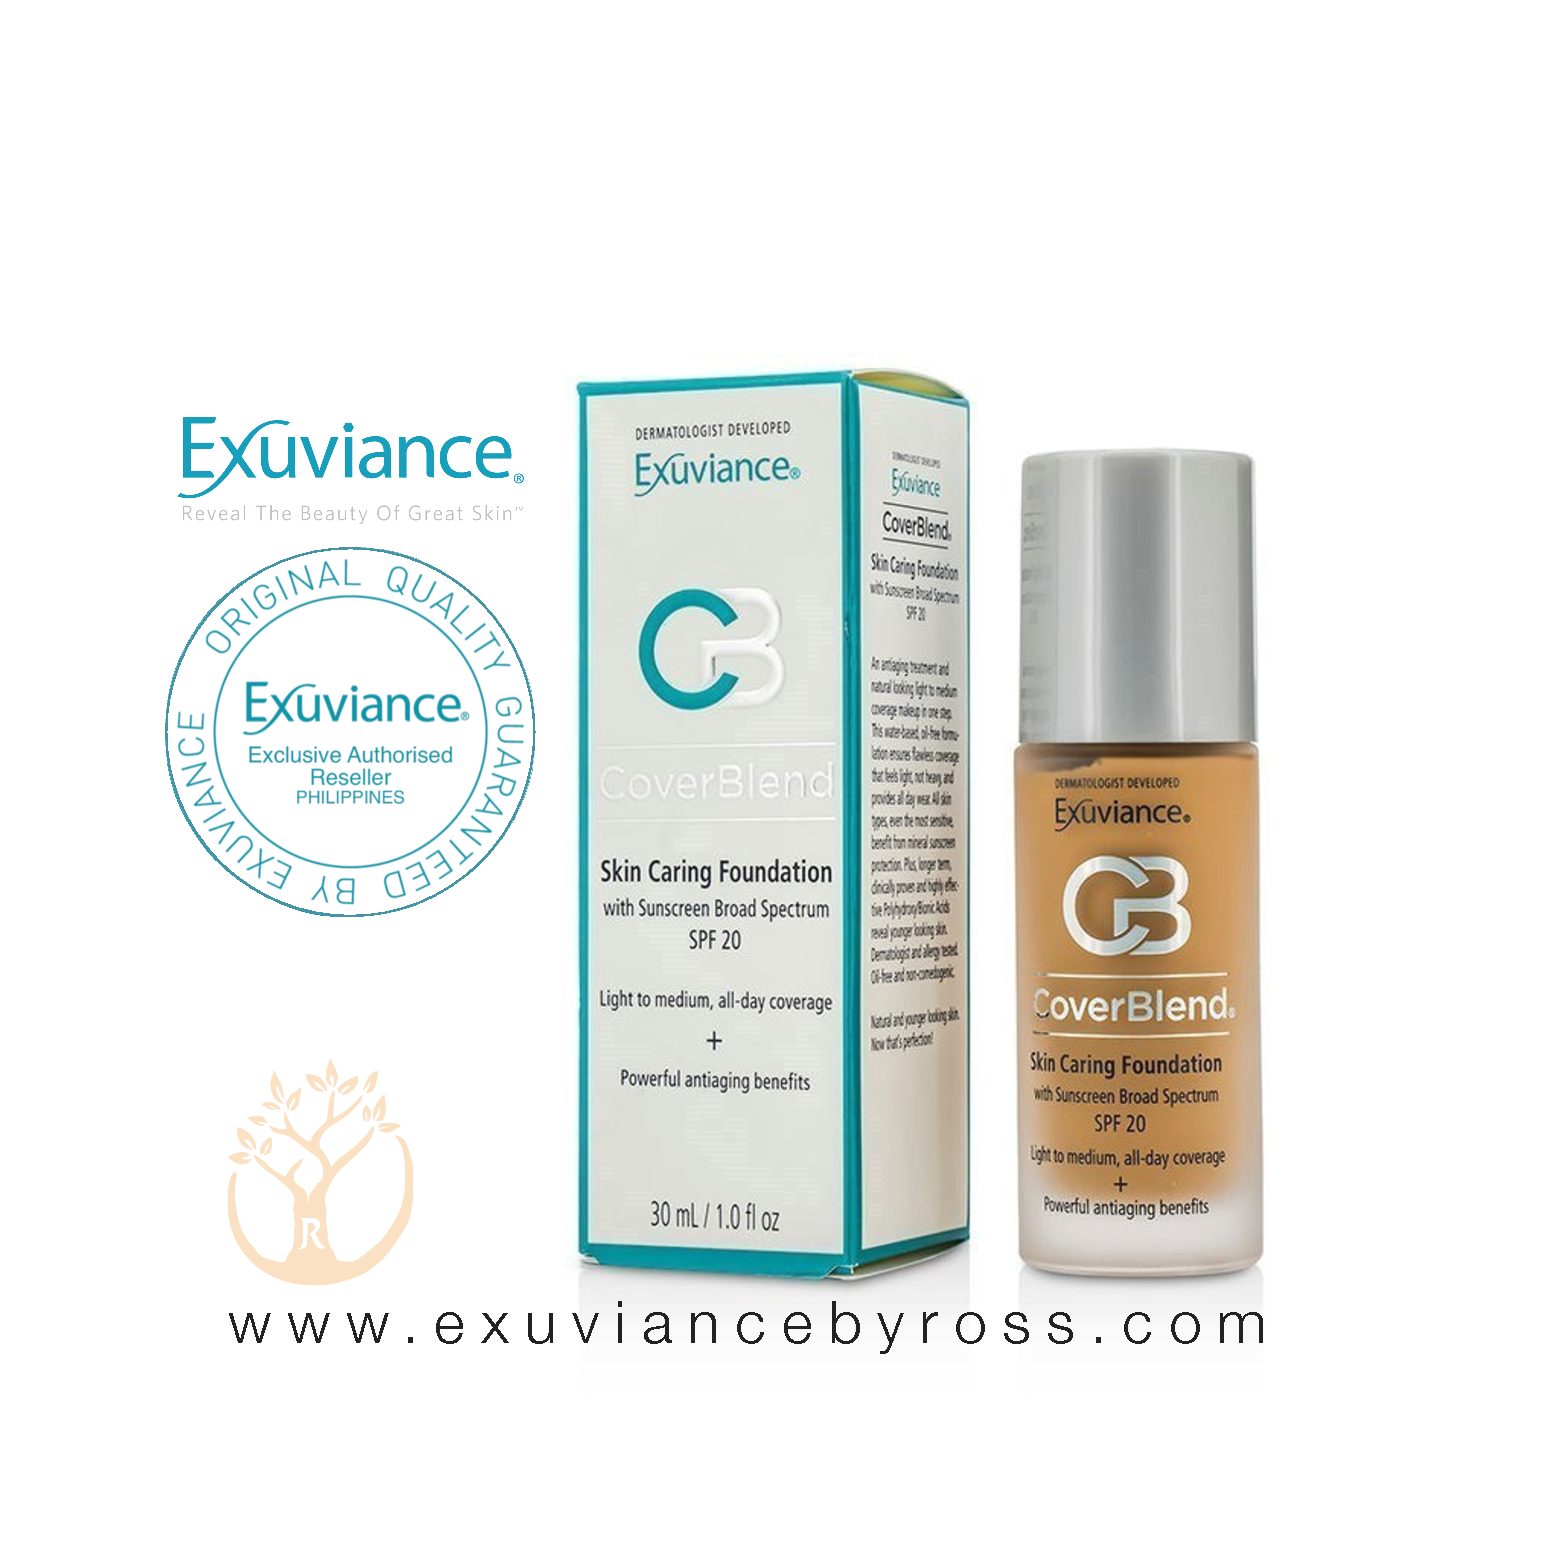 Exuviance CoverBlend Skin Caring Foundation SPF 20 30mL – Neutral Beige -  APRICUS WELLNESS